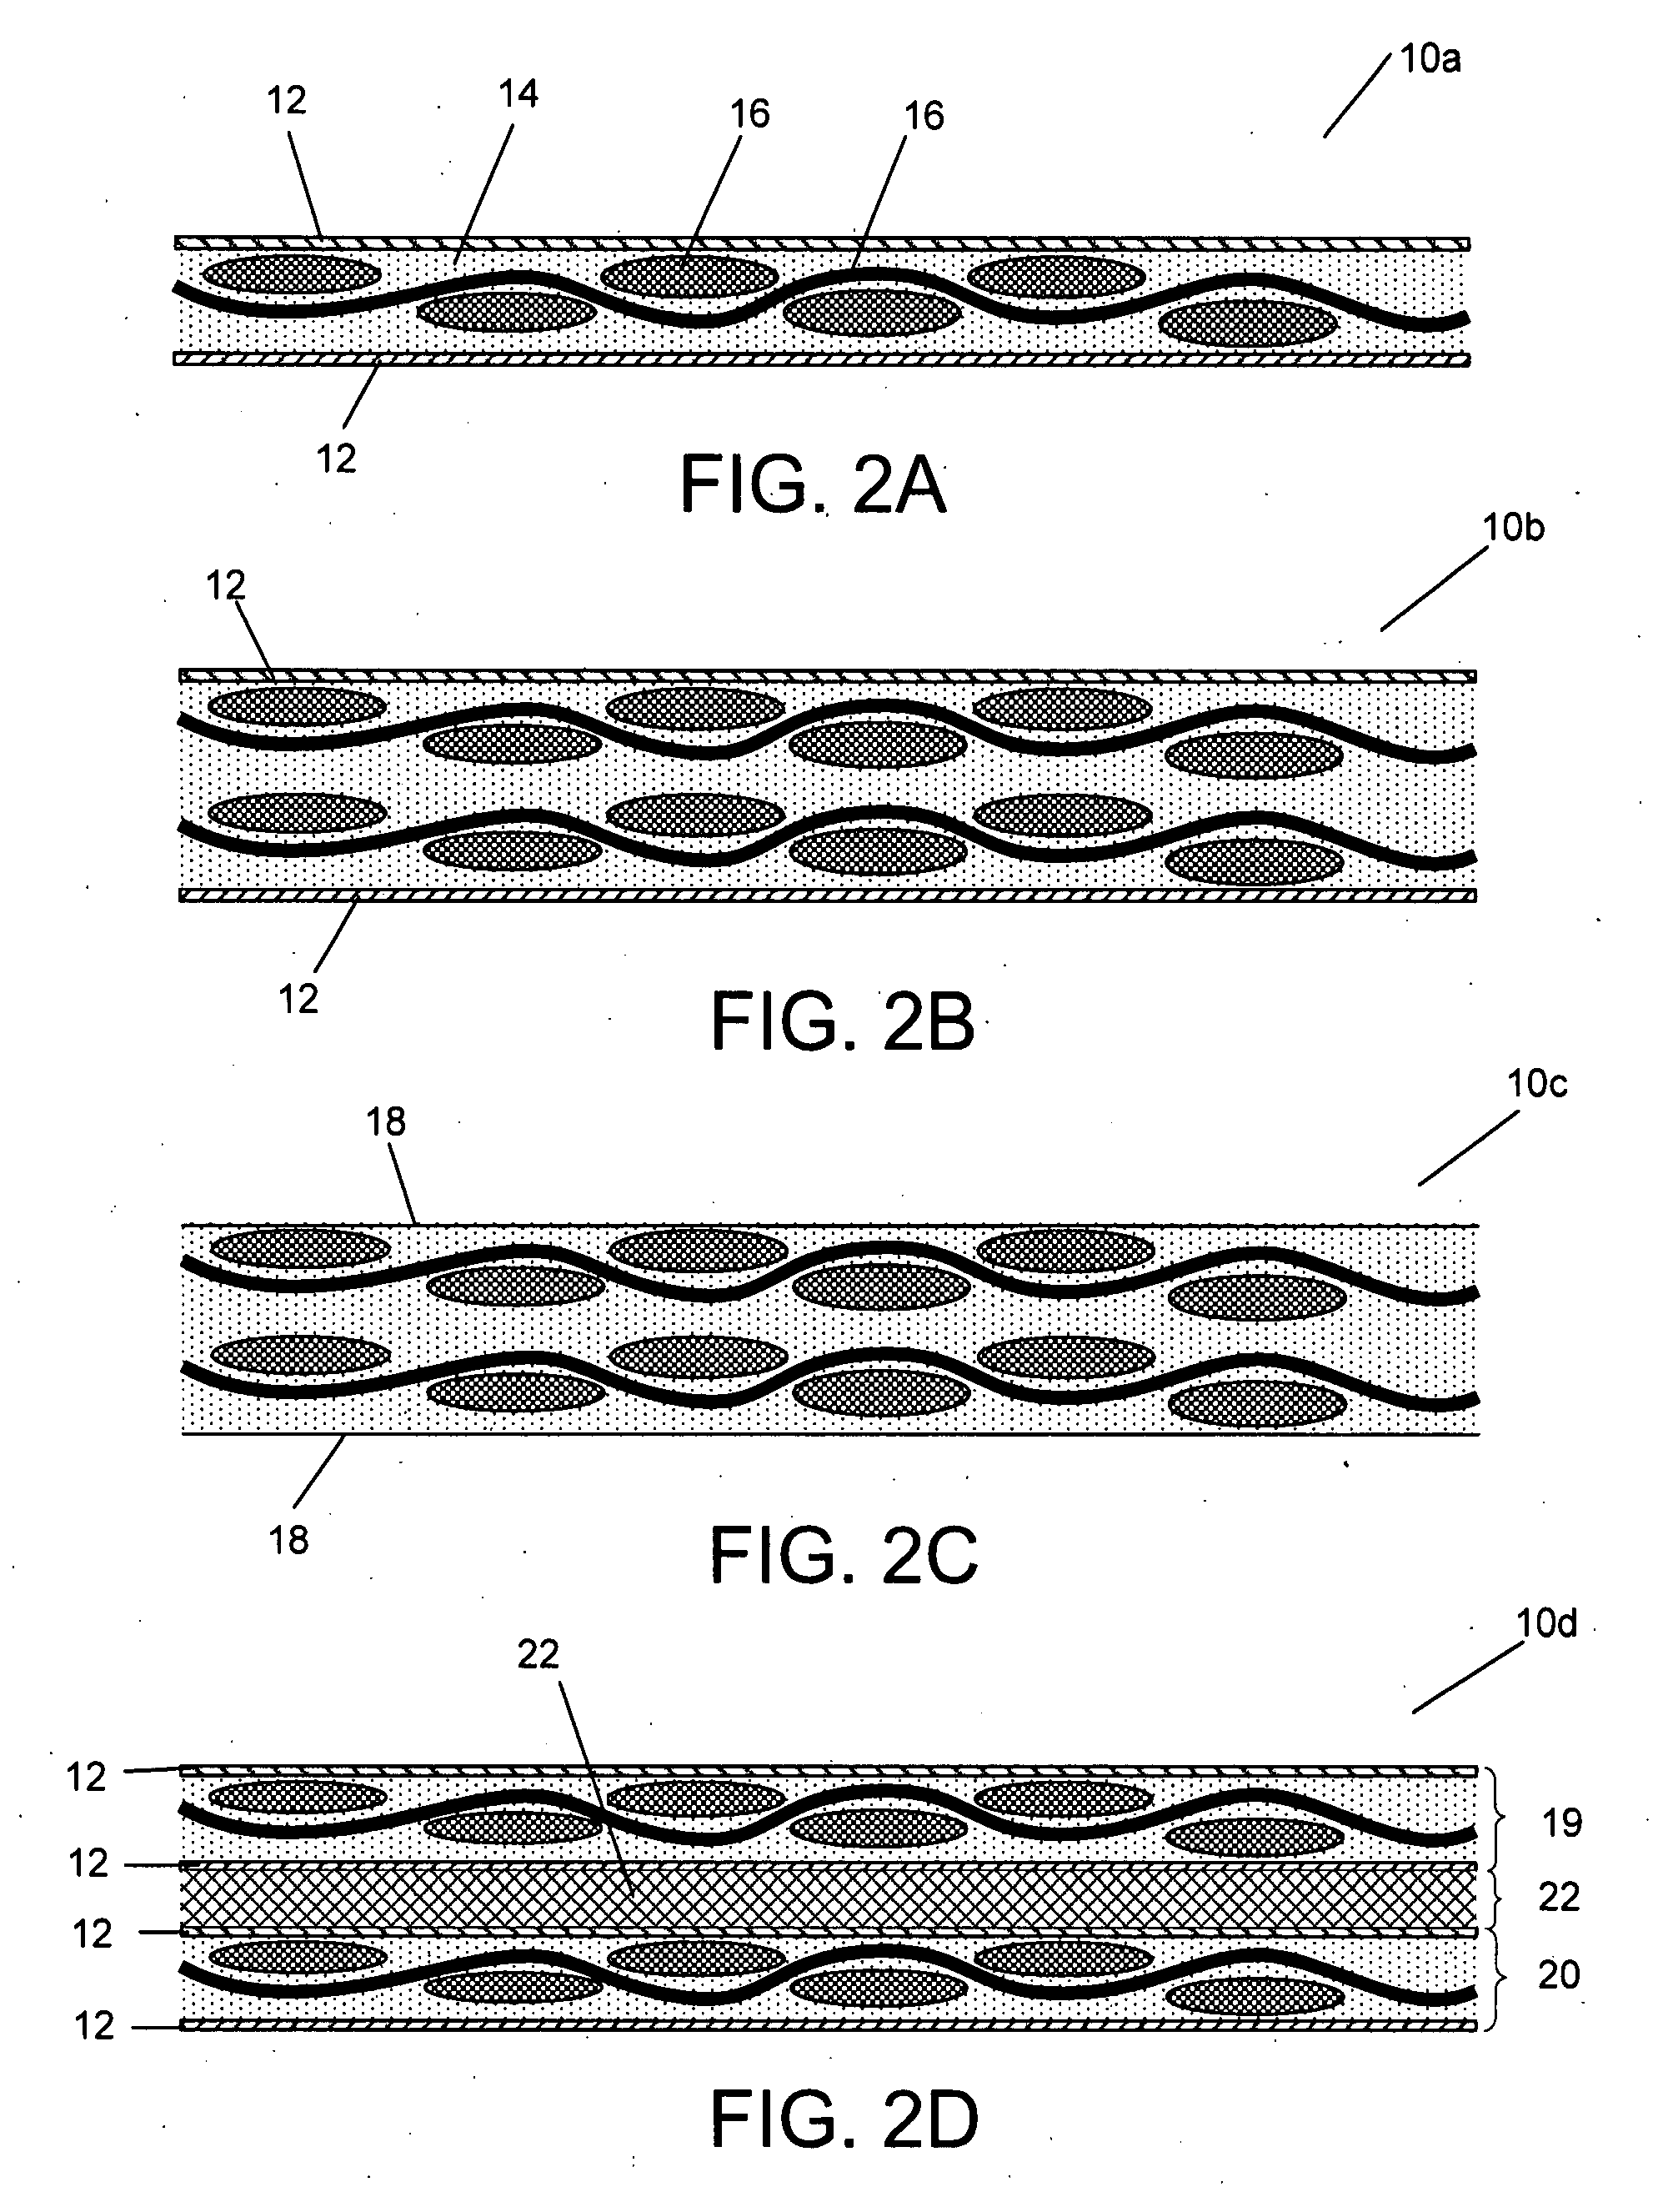 Build-up printed wiring board substrate having a core layer that is part of a circuit